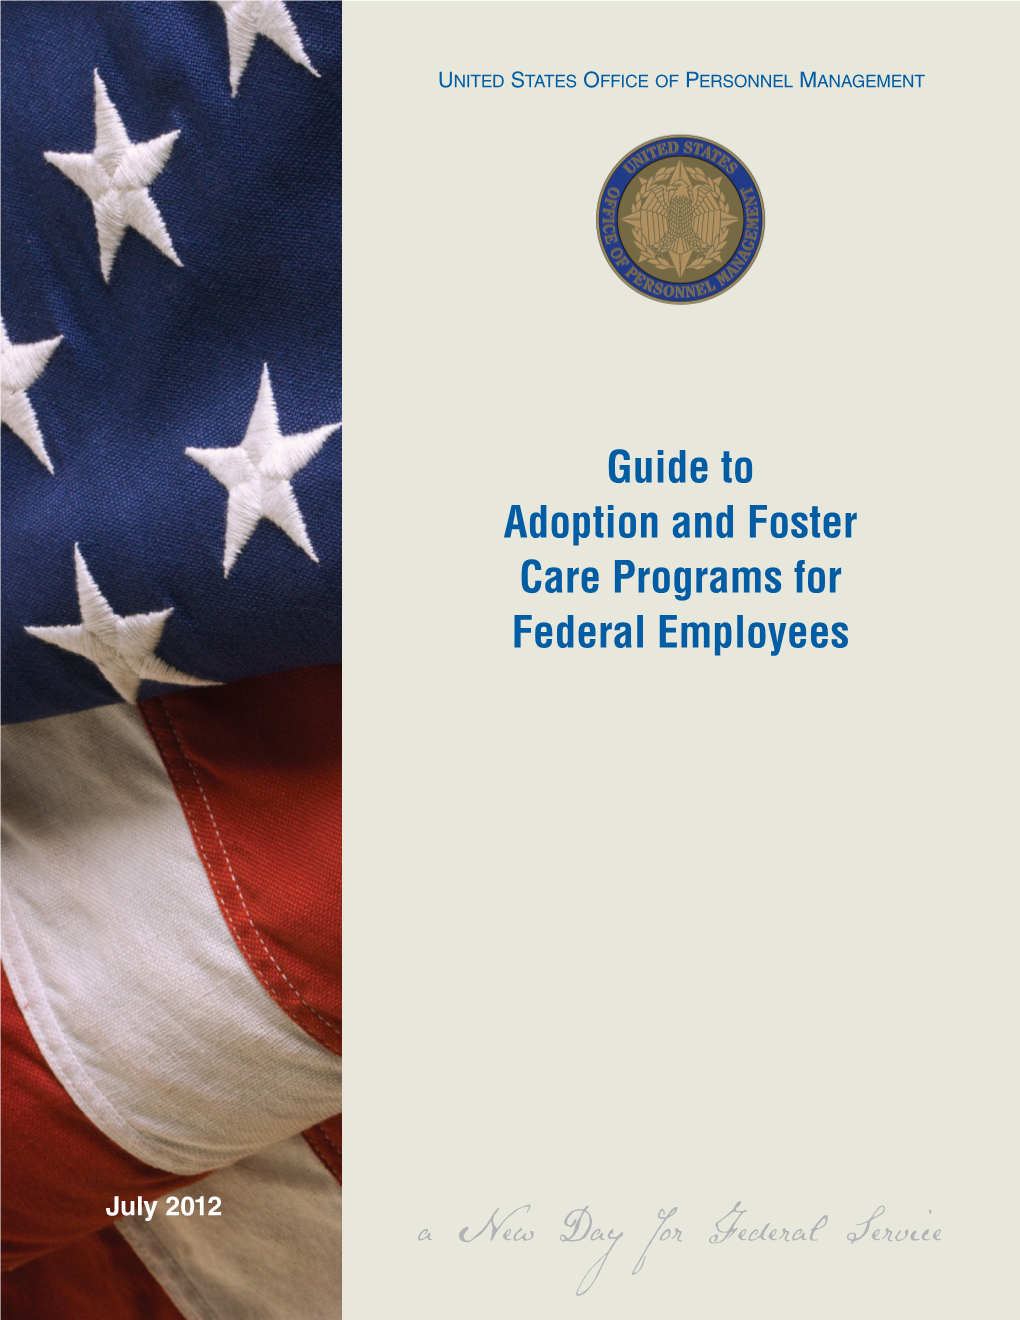 Guide to Adoption and Foster Care Programs for Federal Employees